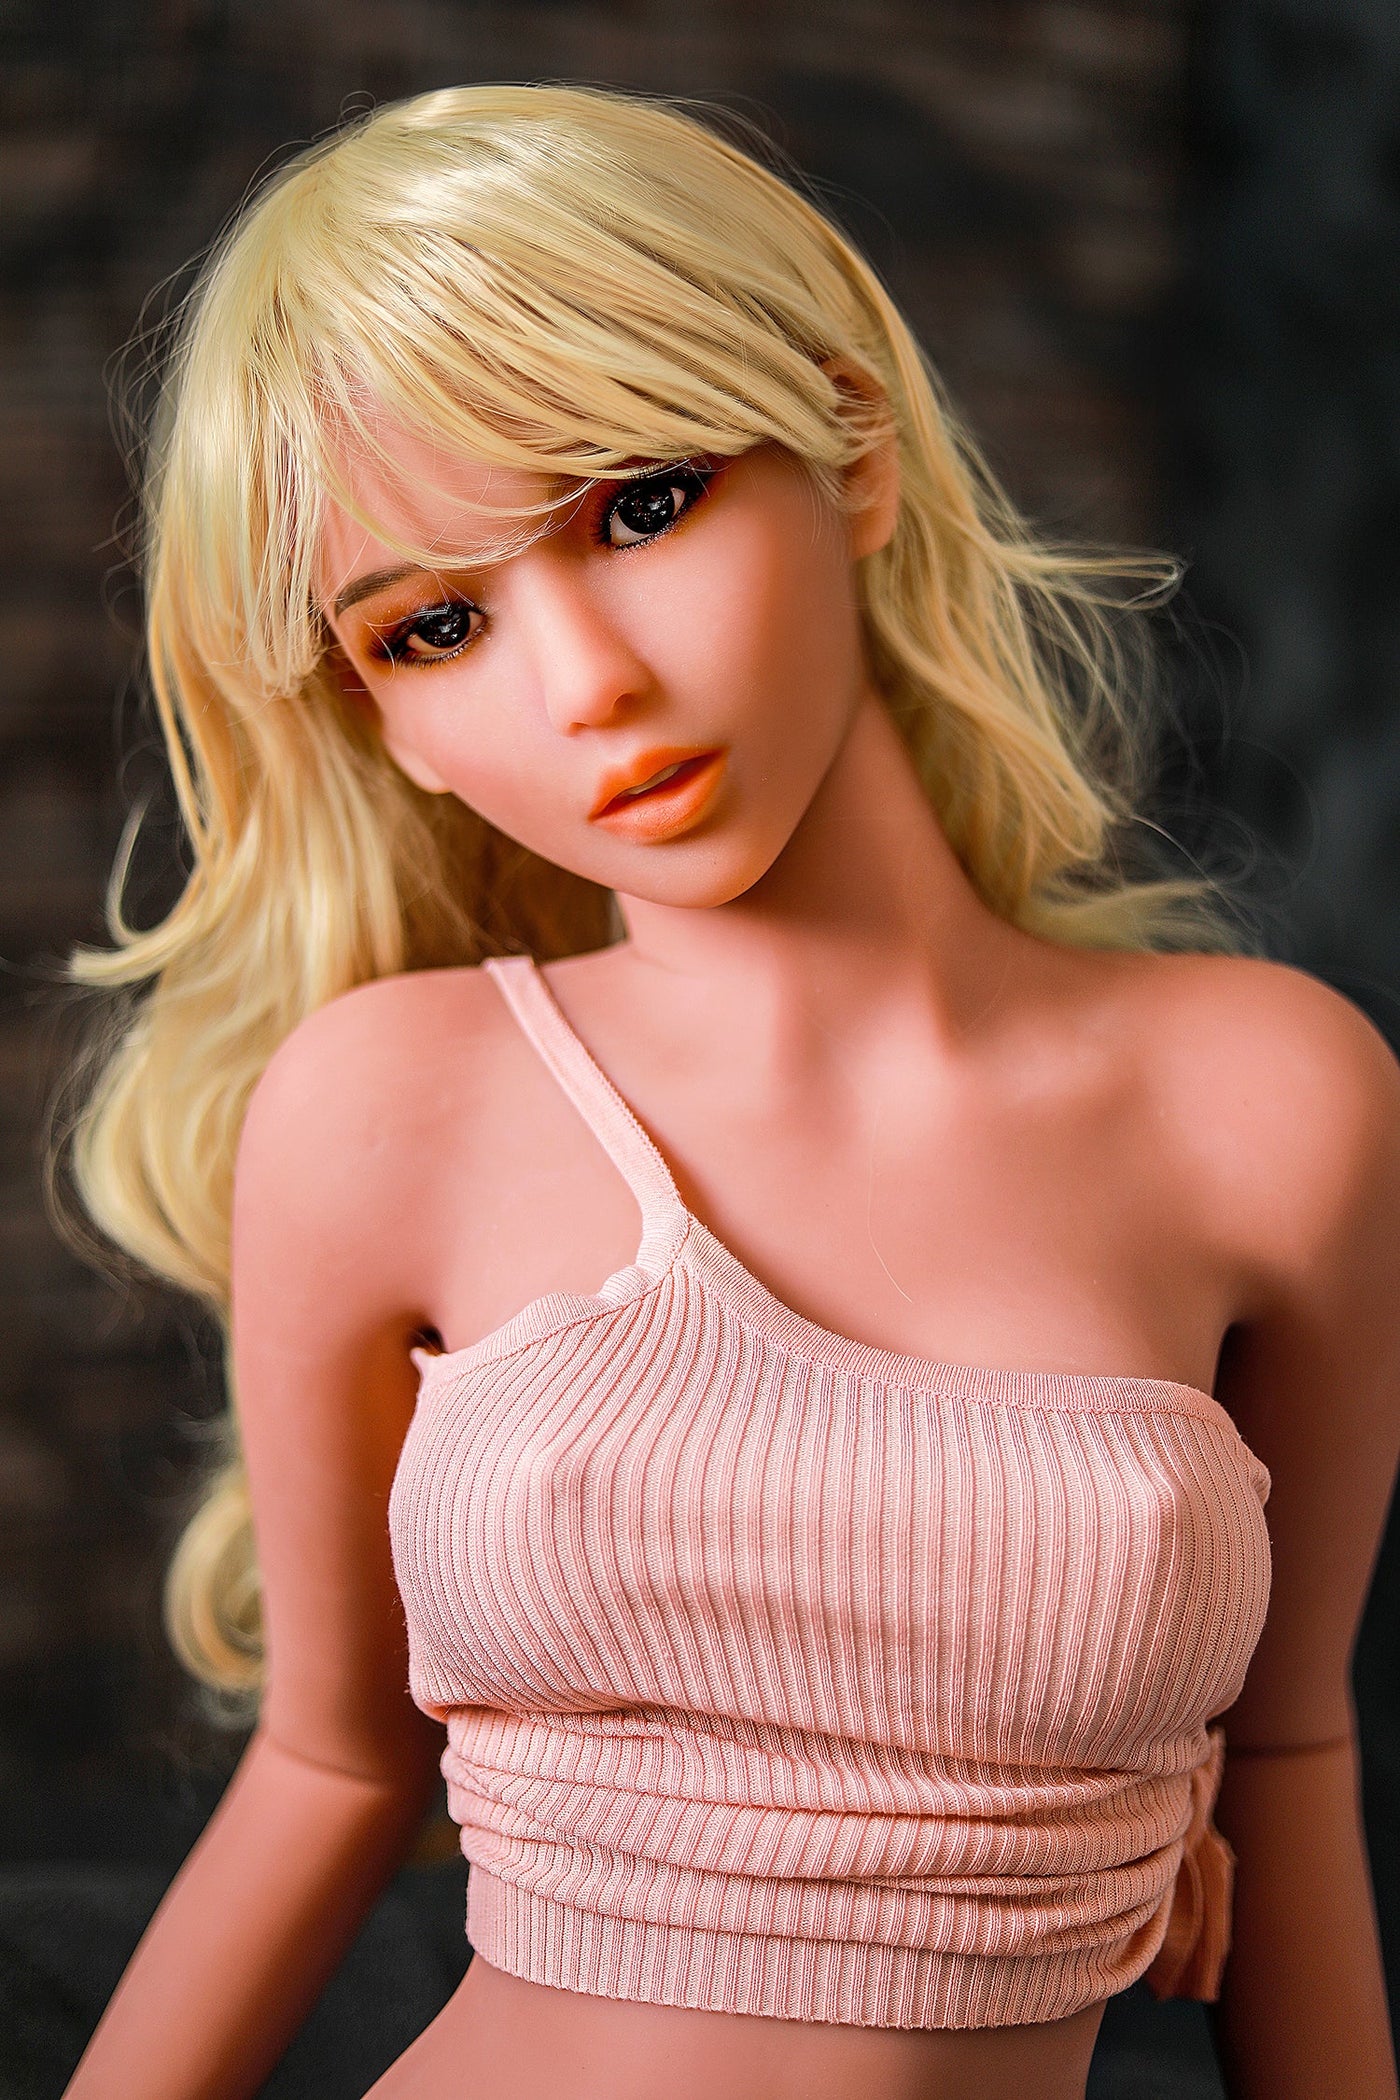 US Stock - RIDMII Gladys 157cm #77 Head Small Breast Young Girl Sex Doll - 157cm, US Stock - SexDollPartner